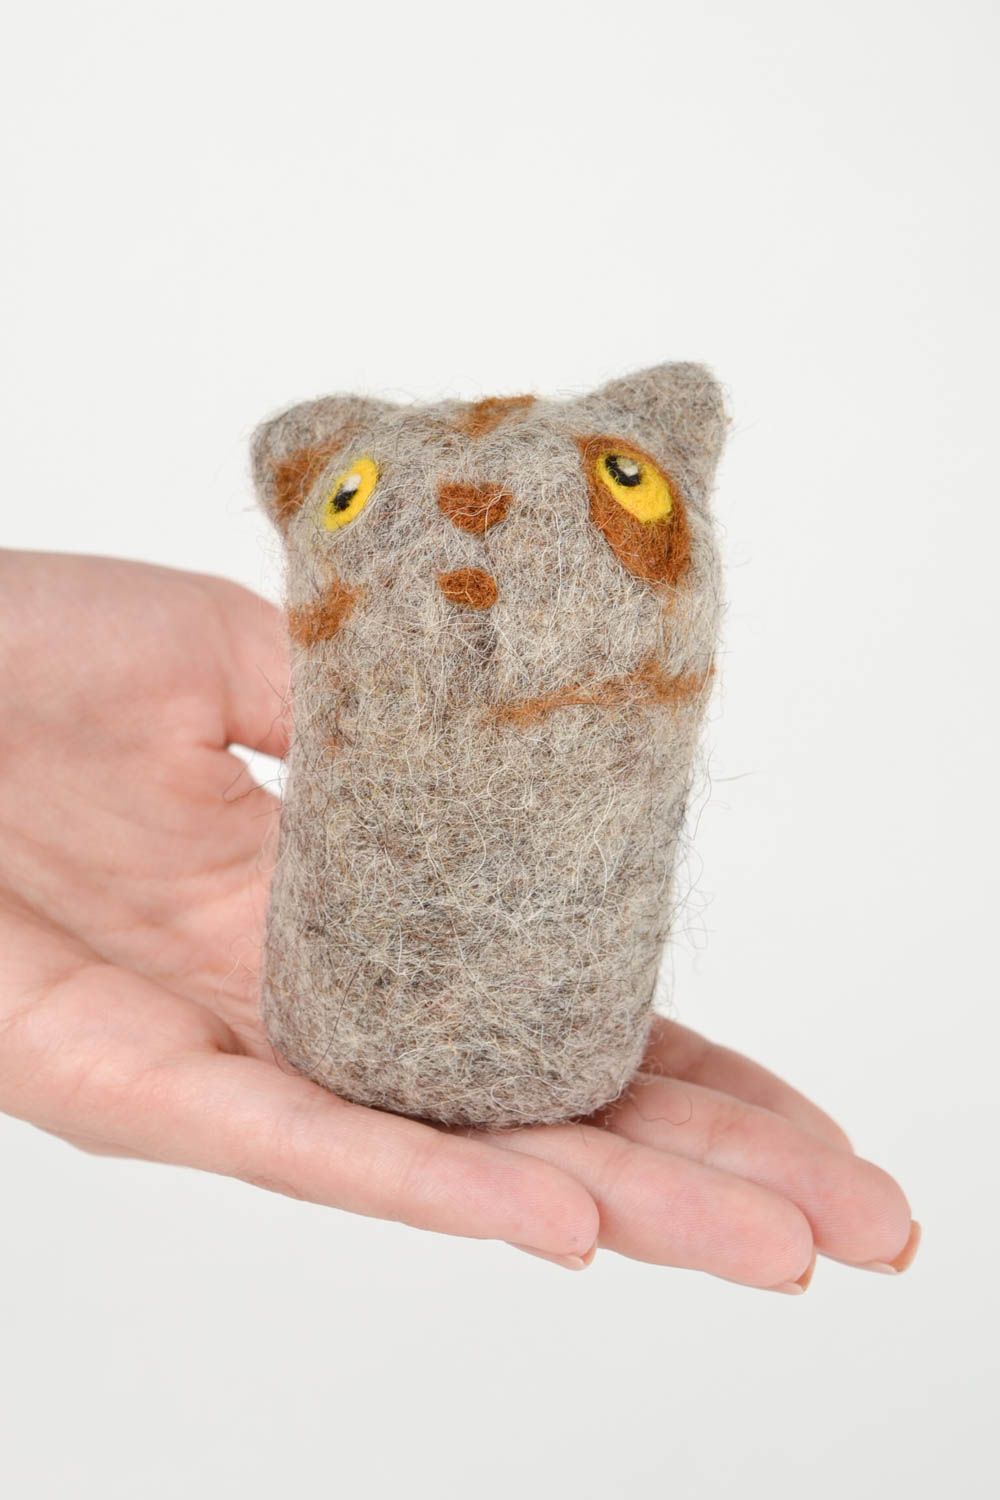 Handmade felted toy handmade woolen toy cute handmade toy kids toy gray cat toy photo 2